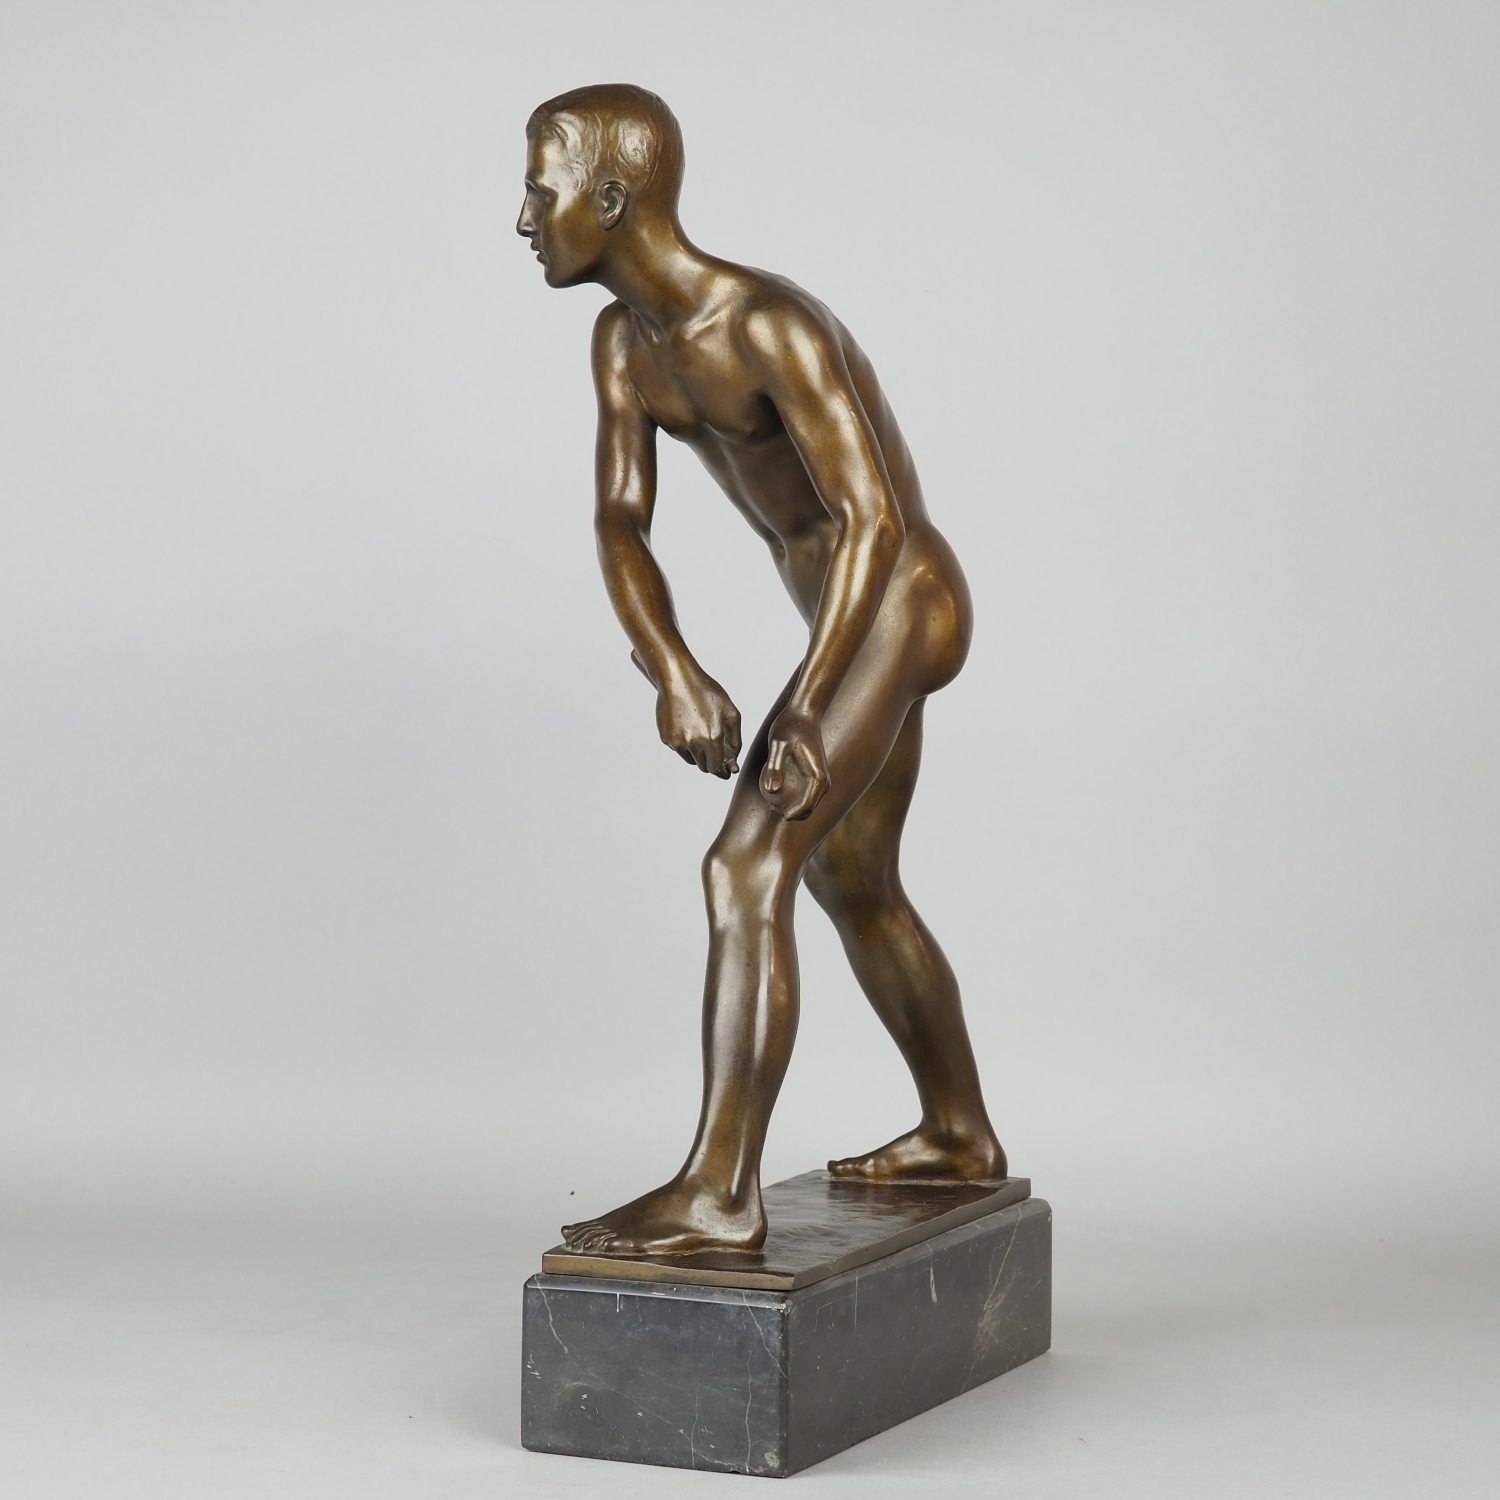 Male Nude of a Relay Runner by August Kattentidt ca. 1930 - Image 3 of 6